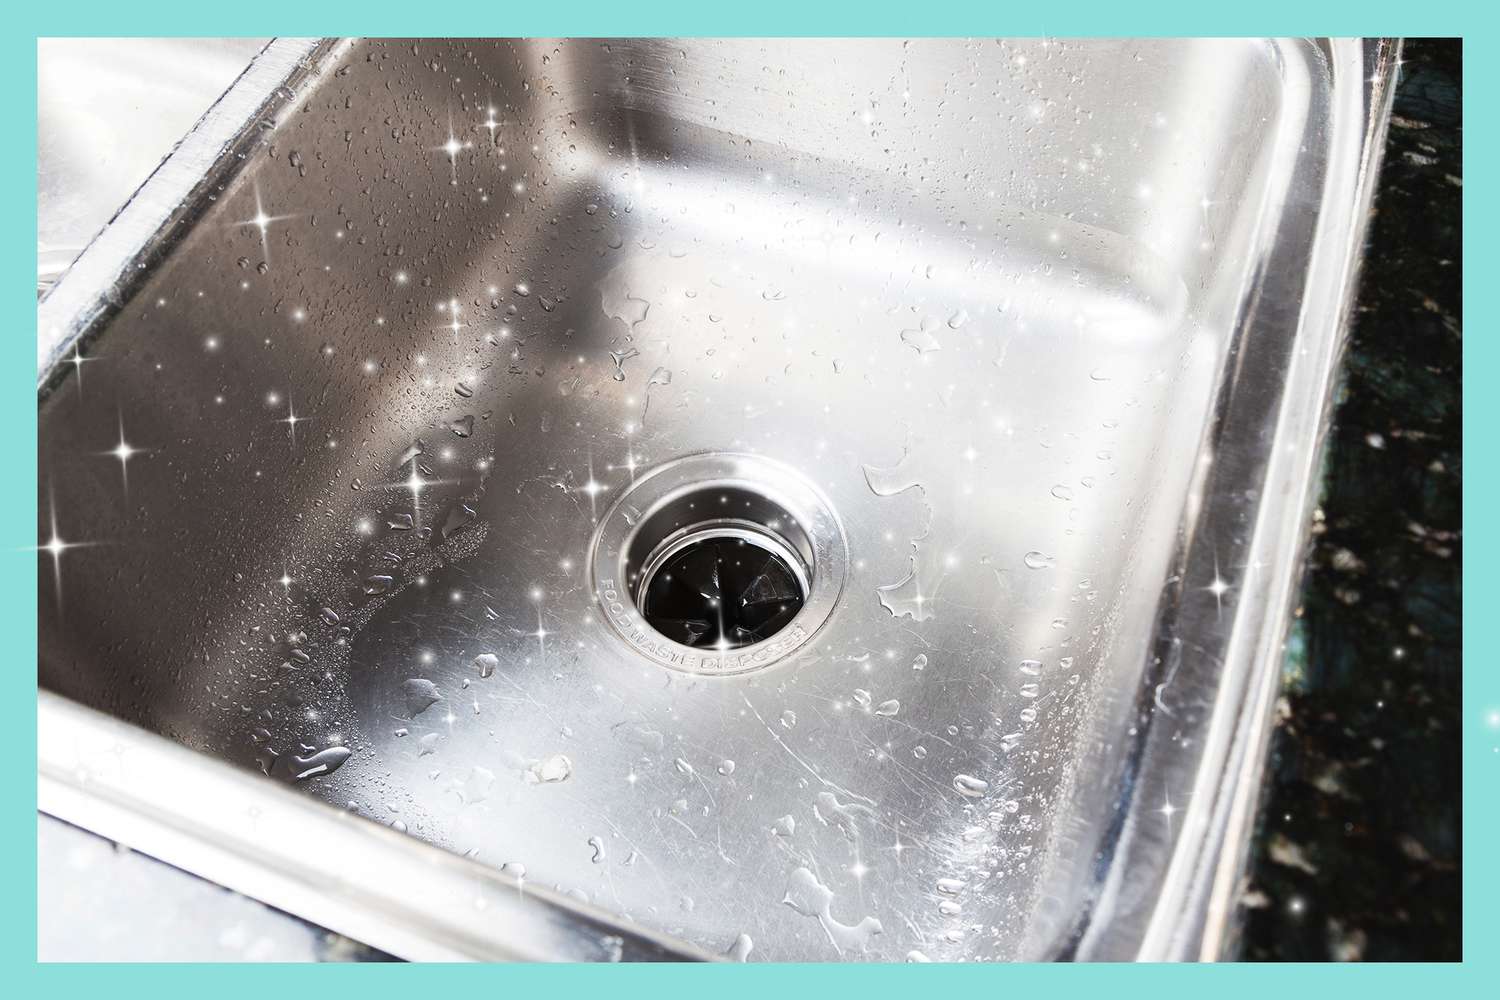 How to Clean a Garbage Disposal the Right Way, According to Experts